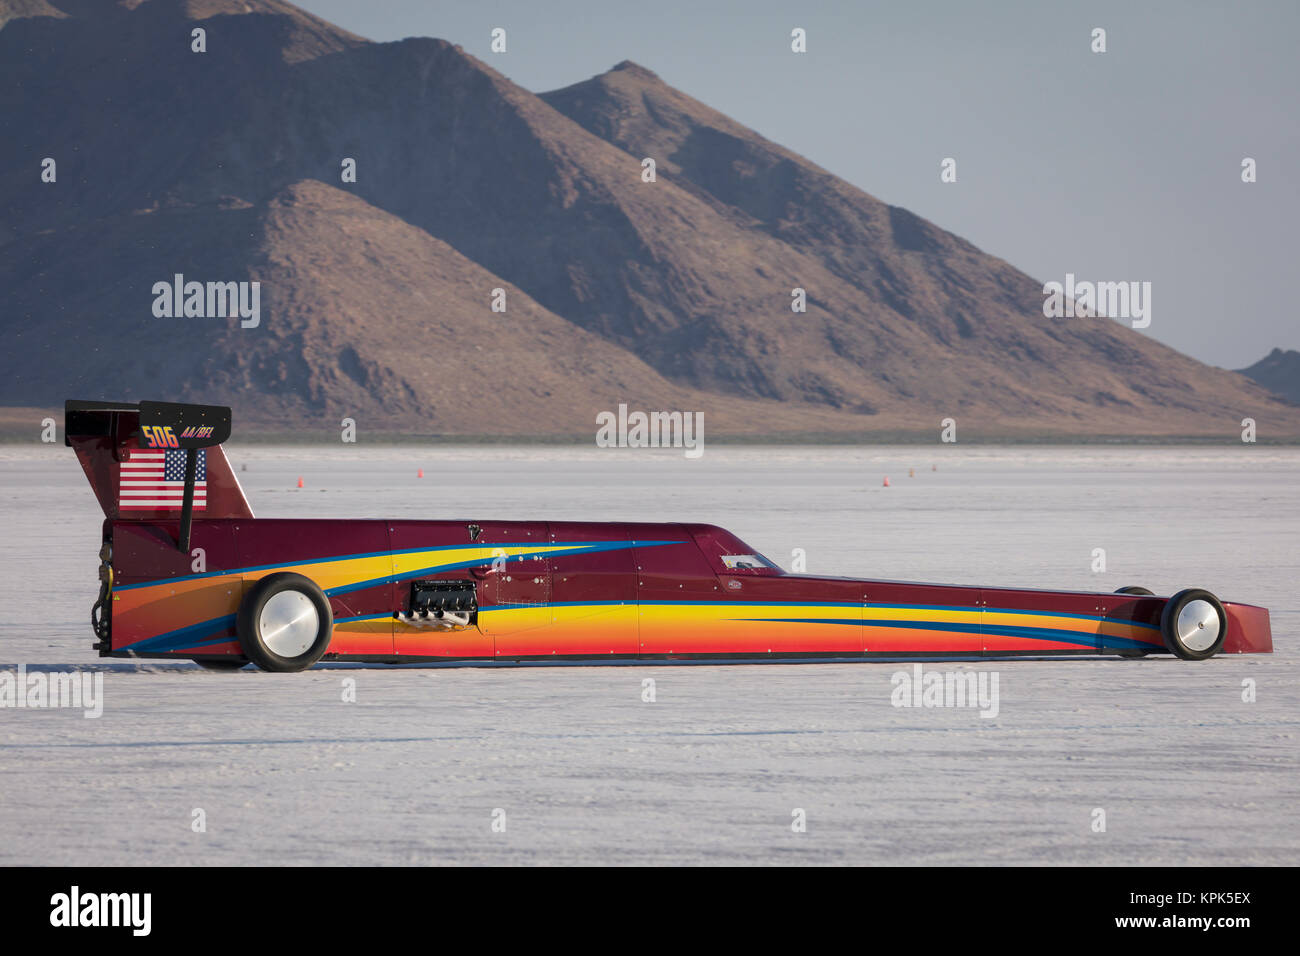 Blown Fuel Lakester AA/BFL at speeed on Bonneville Salt Flats during Bonneville Speed Week 2017; Wendover, Utah, United States of America Stock Photo